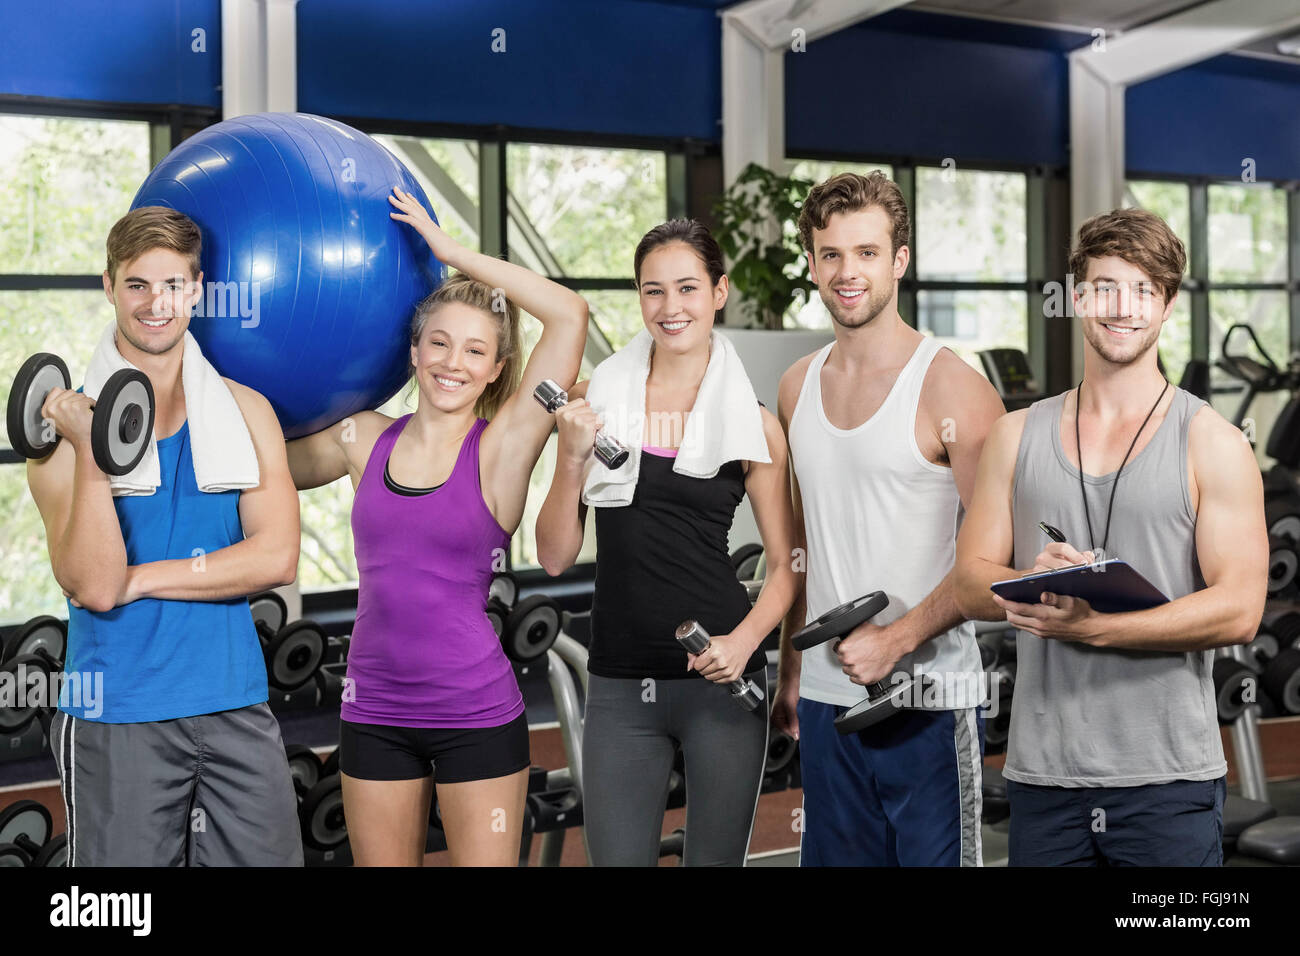 Fit people with sports equipment Stock Photo